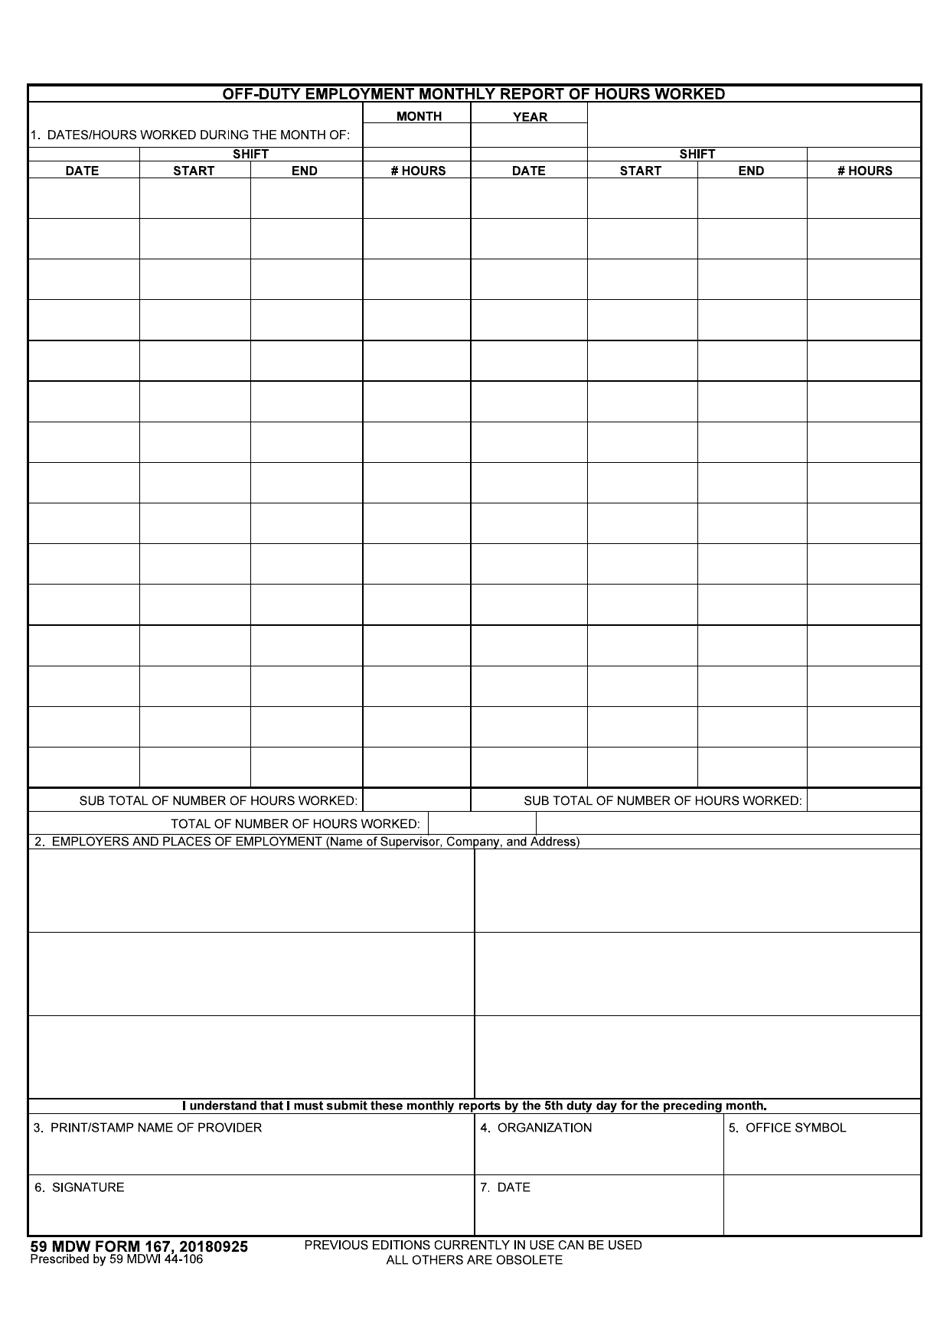 59 MDW Form 167 Download Fillable PDF Or Fill Online Off Duty 